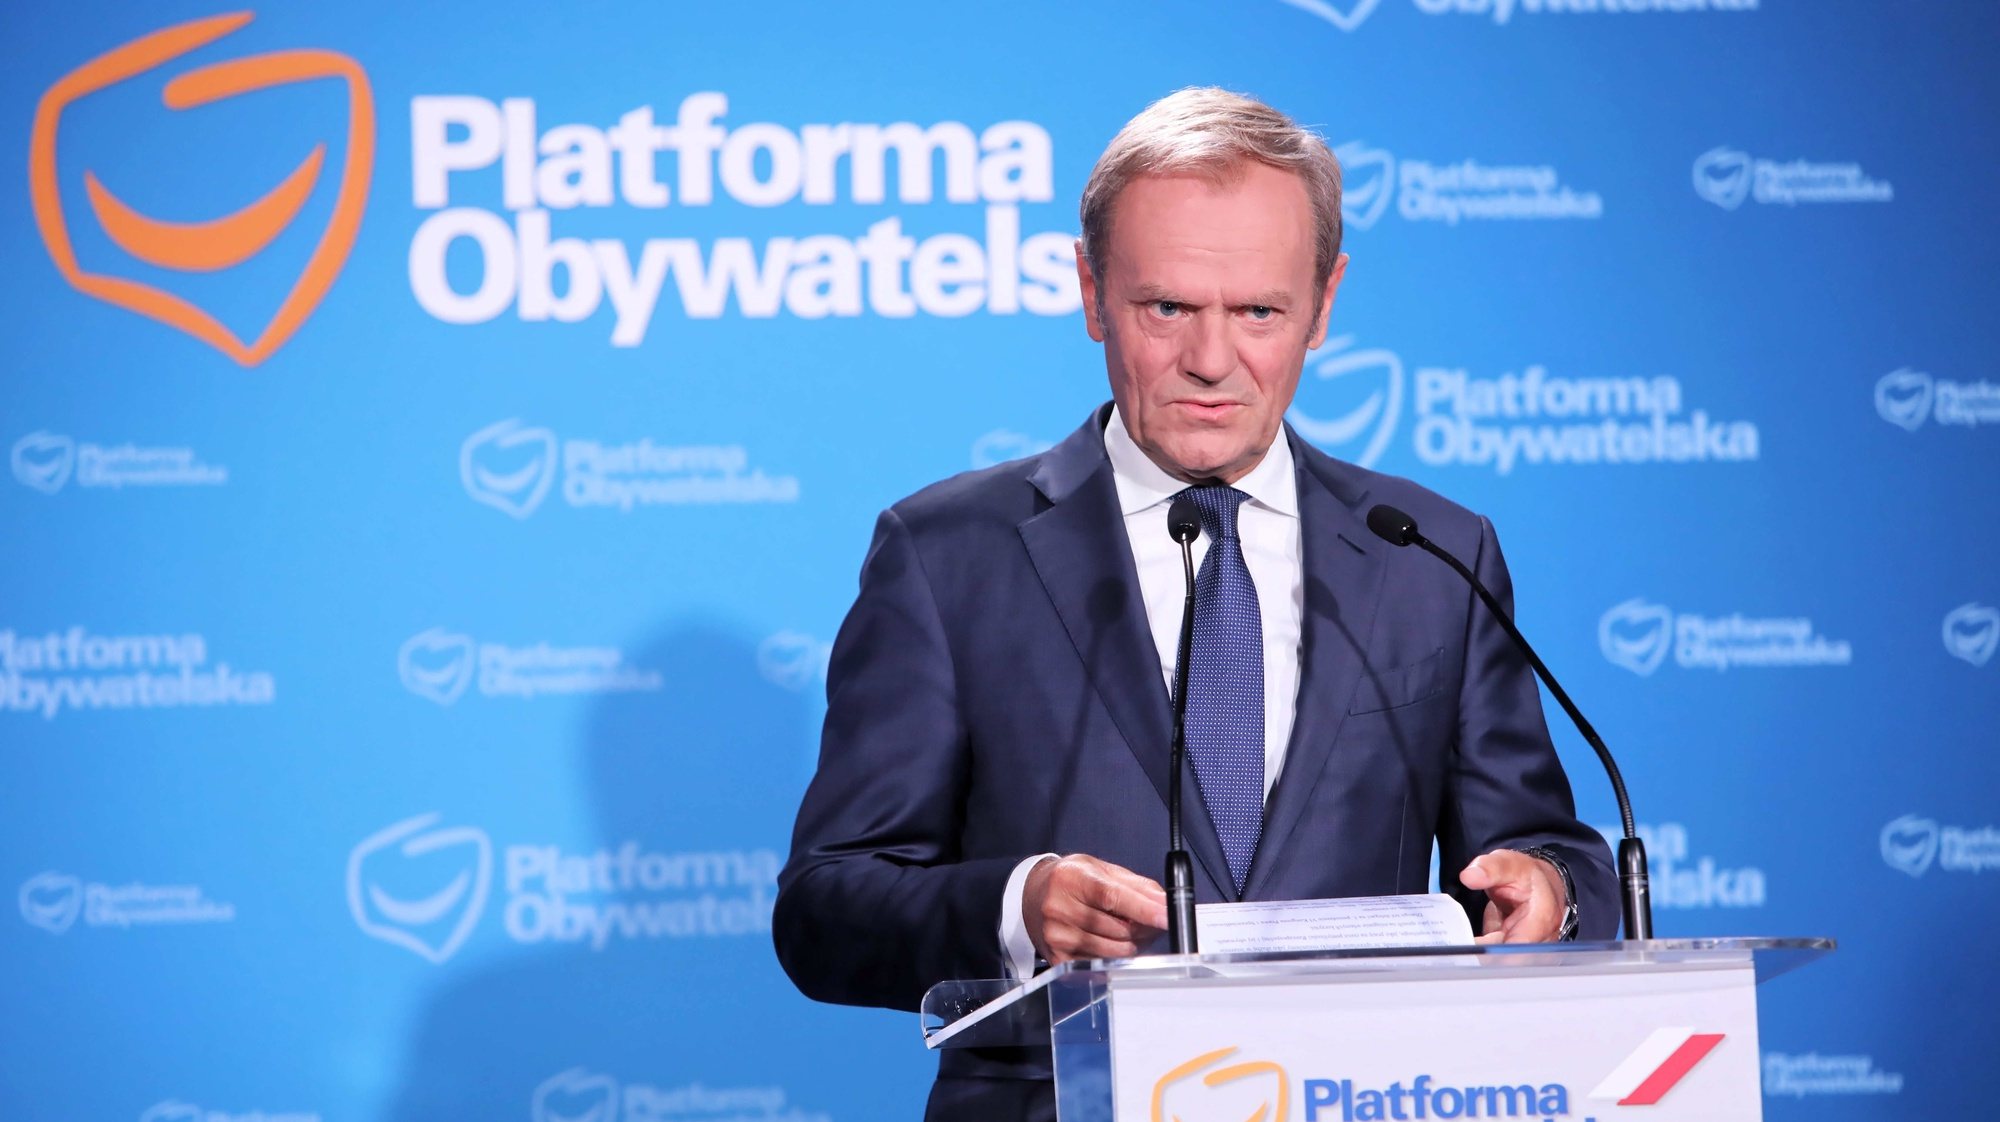 epa09322033 Leader of main opposition party Civic Platform Donald Tusk delivers a speech during a press conference in Warsaw, Poland, 04 July 2021. Tusk became leader of Civic Platform (PO), the main opposition party, following the resignation of Borys Budka on 03 July.  EPA/Wojciech Olkusnik POLAND OUT